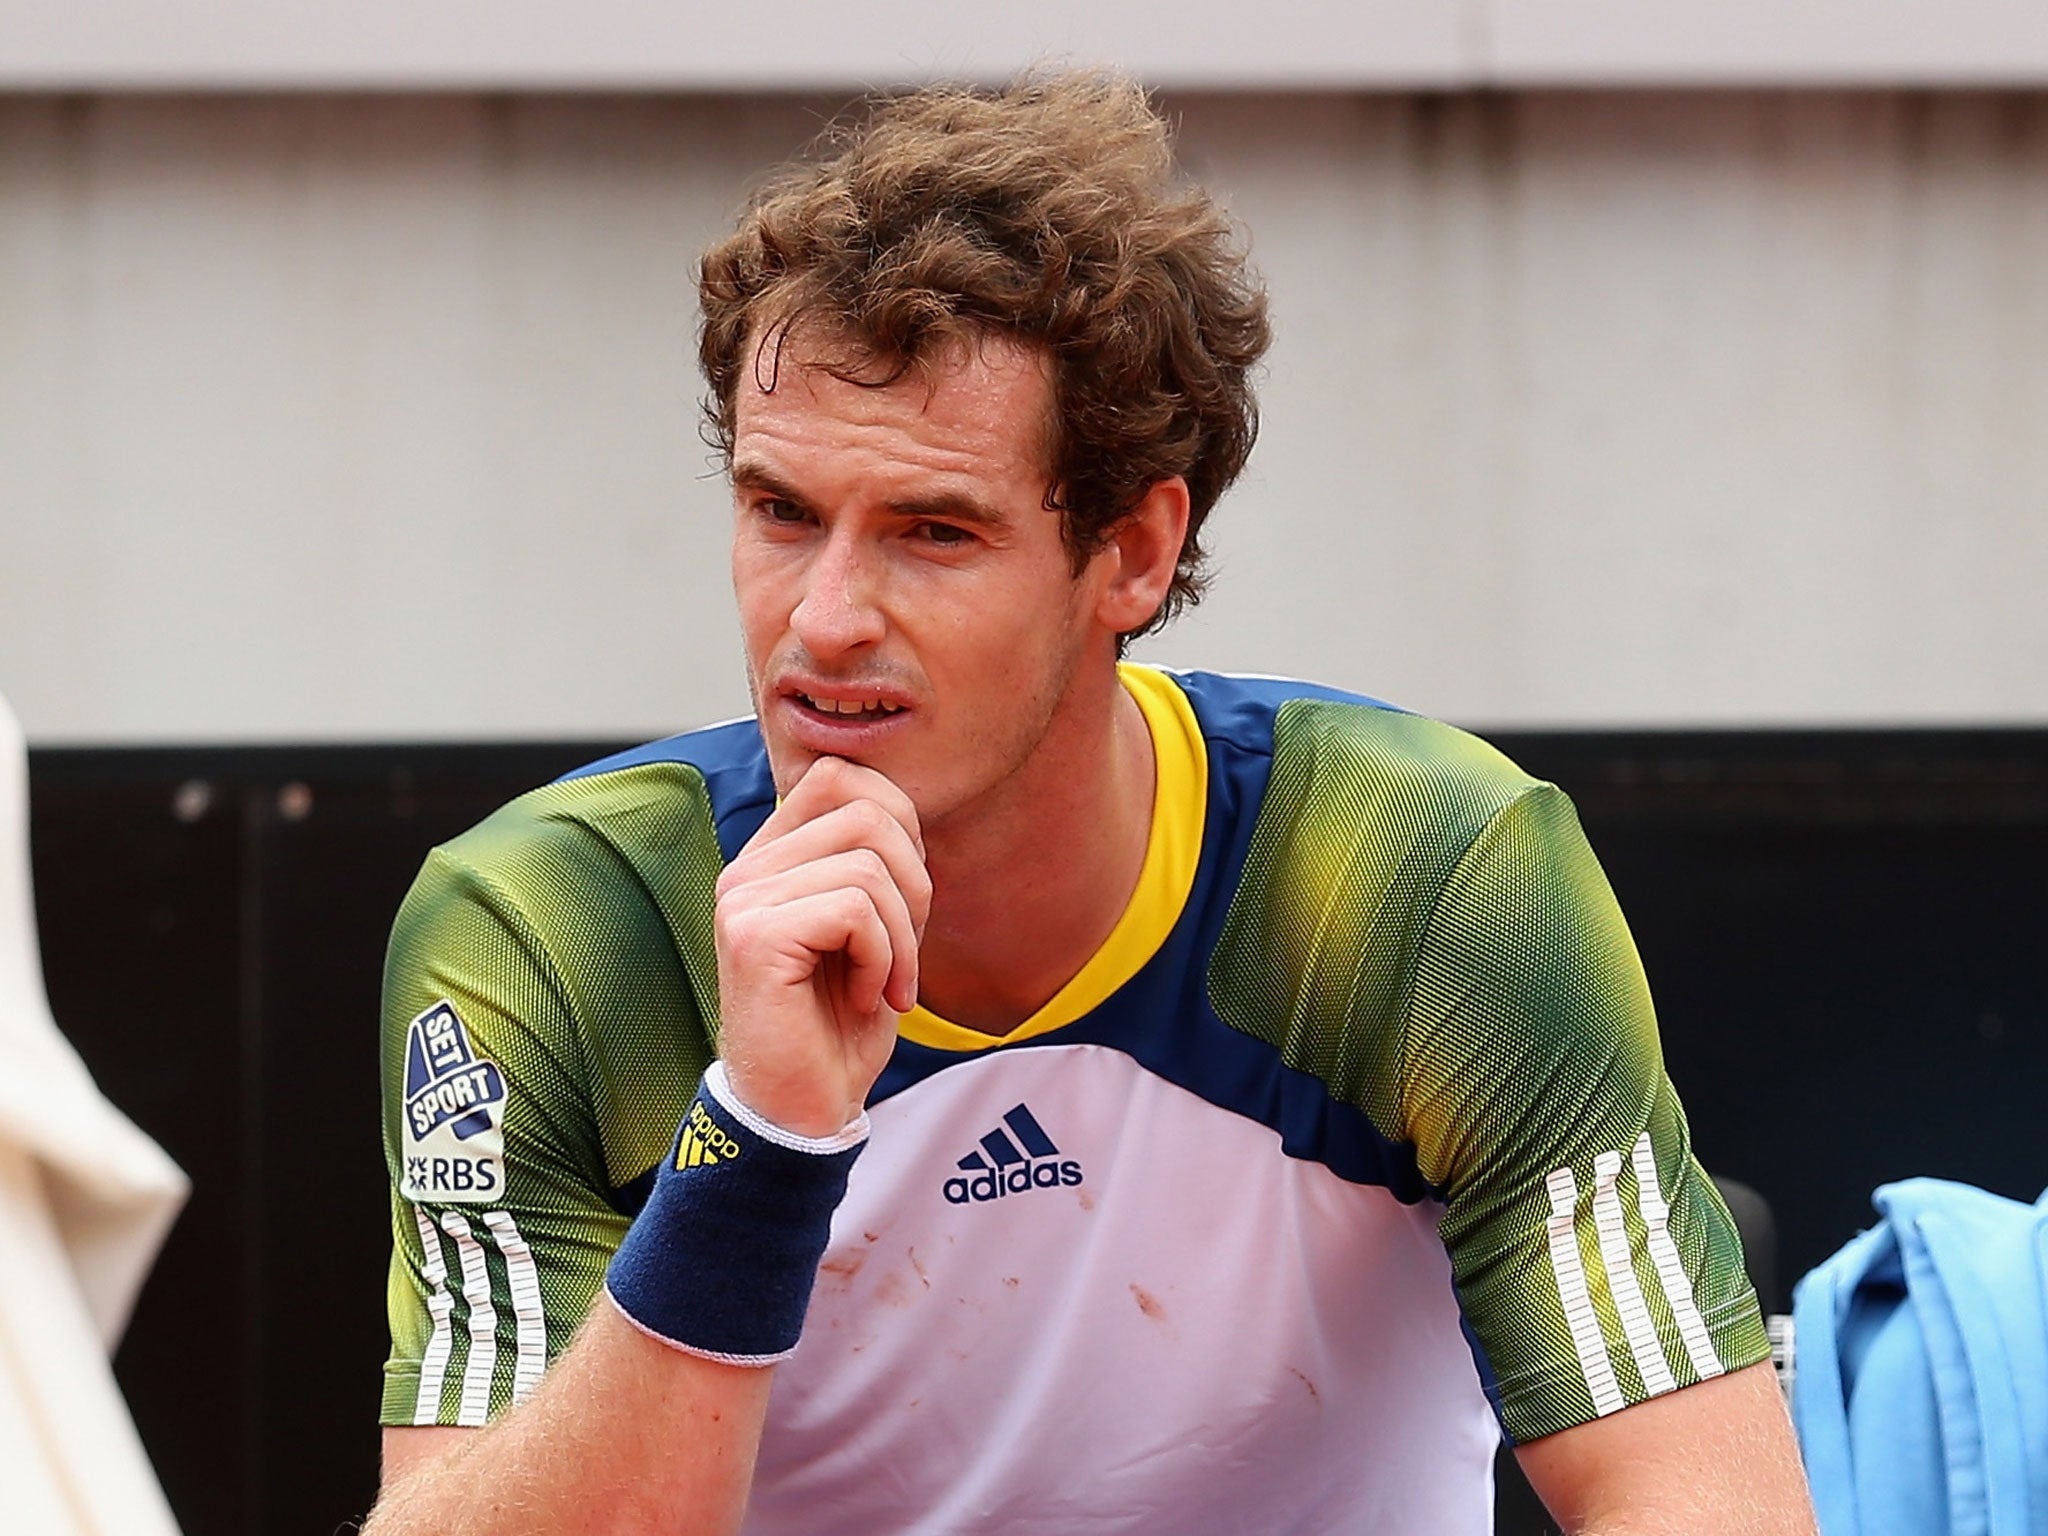 Andy Murray is expecting to make a decision on whether to play in the French Open later this week